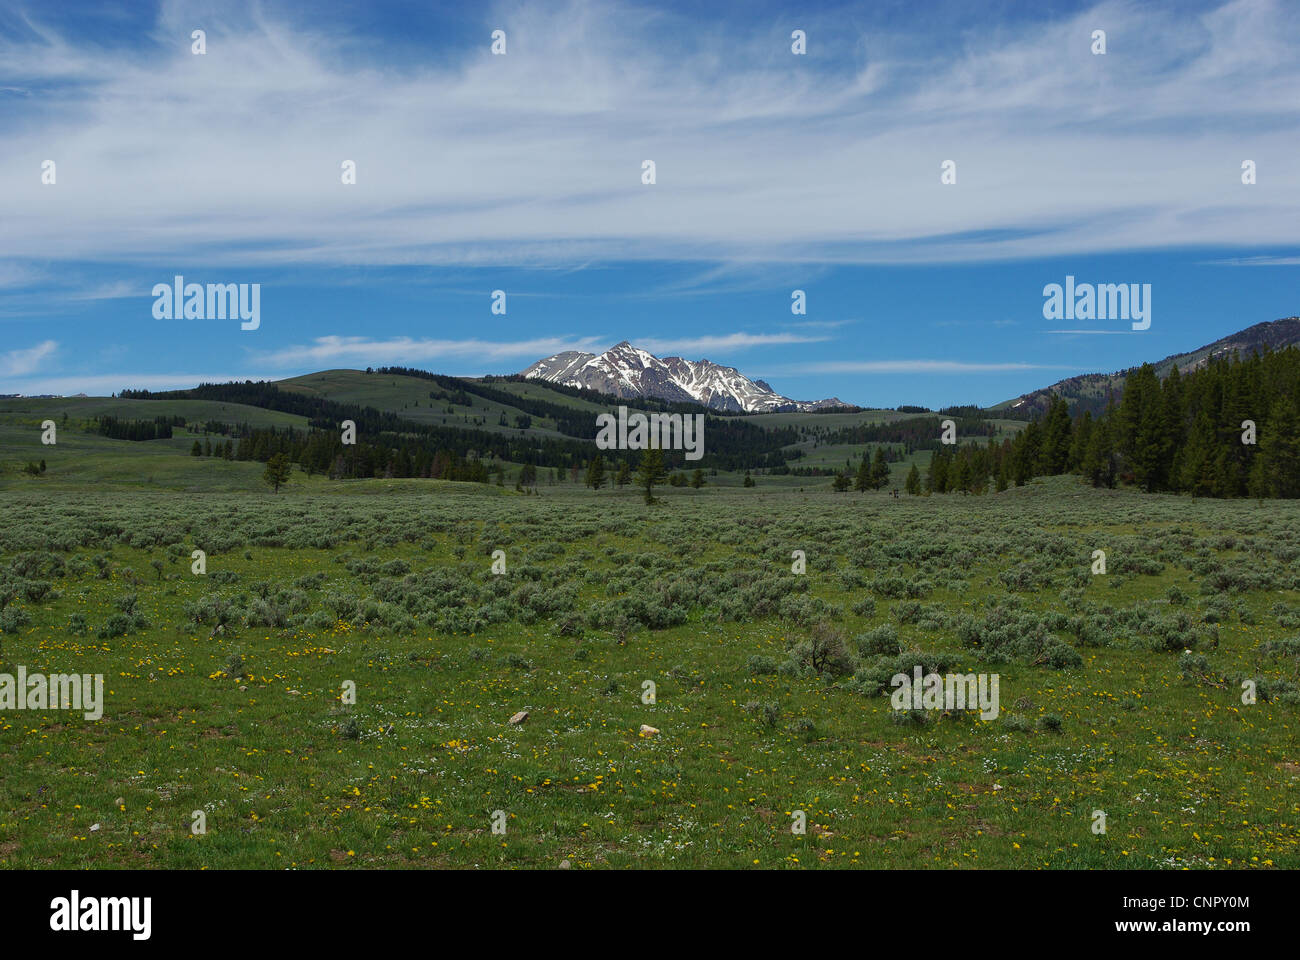 Meadows, forest and Rockies, Yellowstone National Park, Wyoming Stock Photo